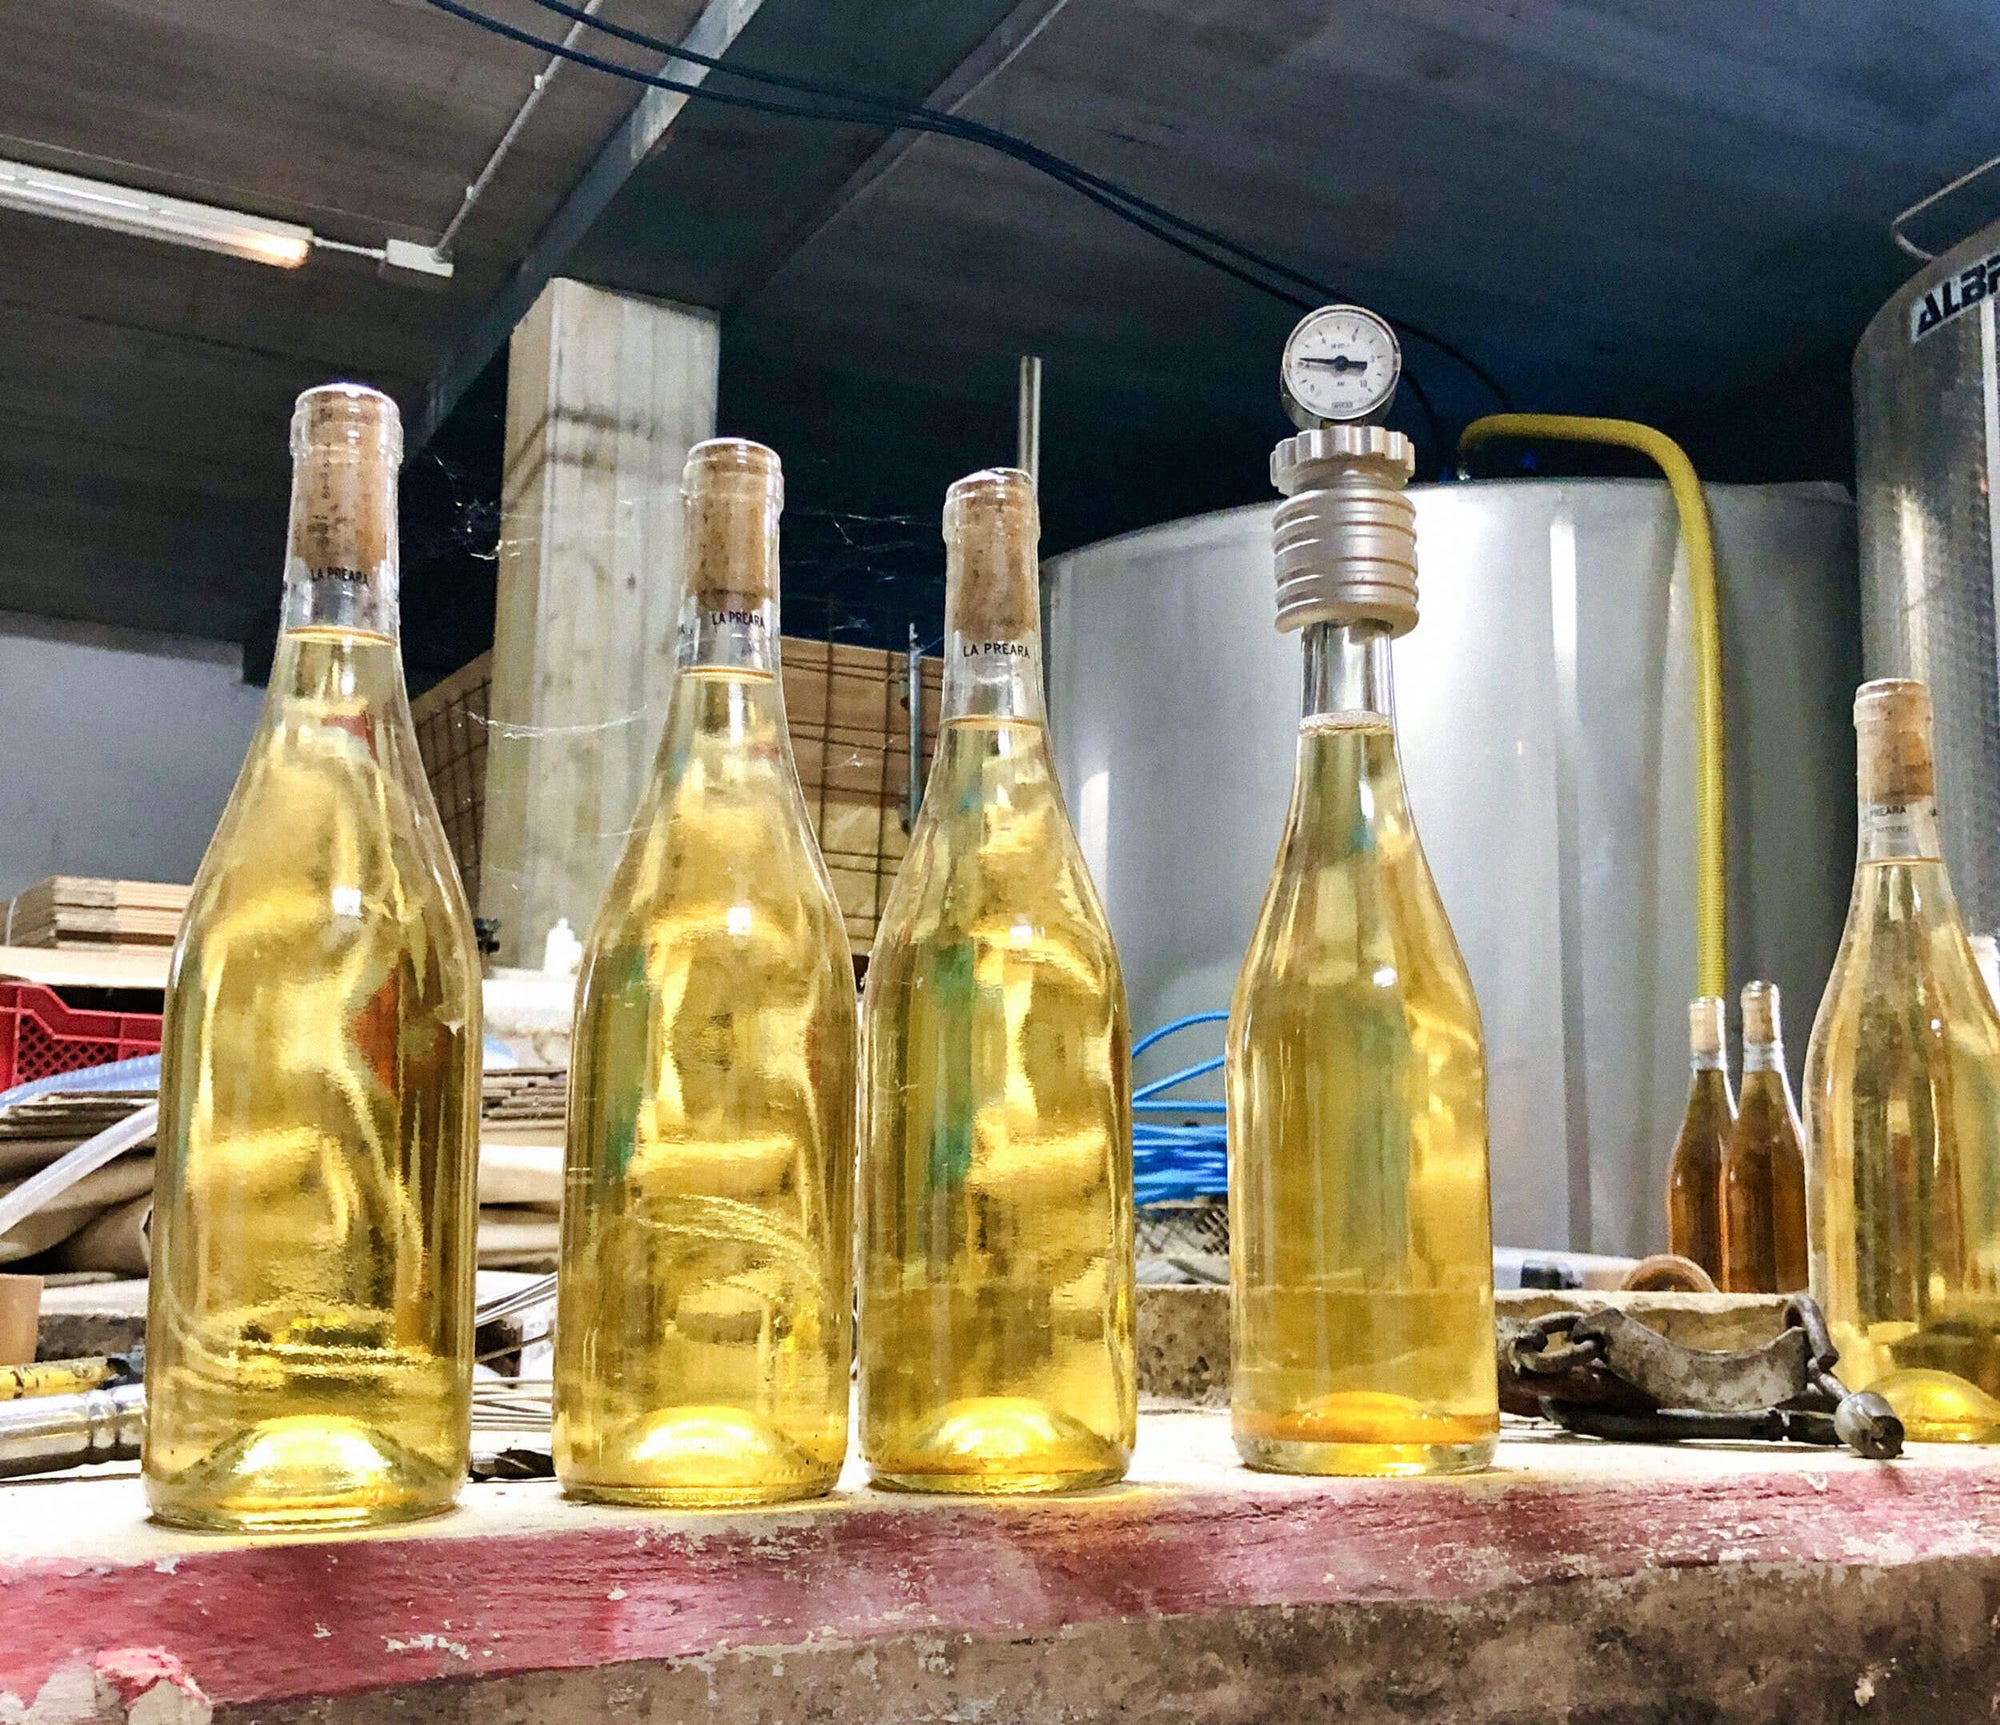 Five bottles of white wine during bottling in winery